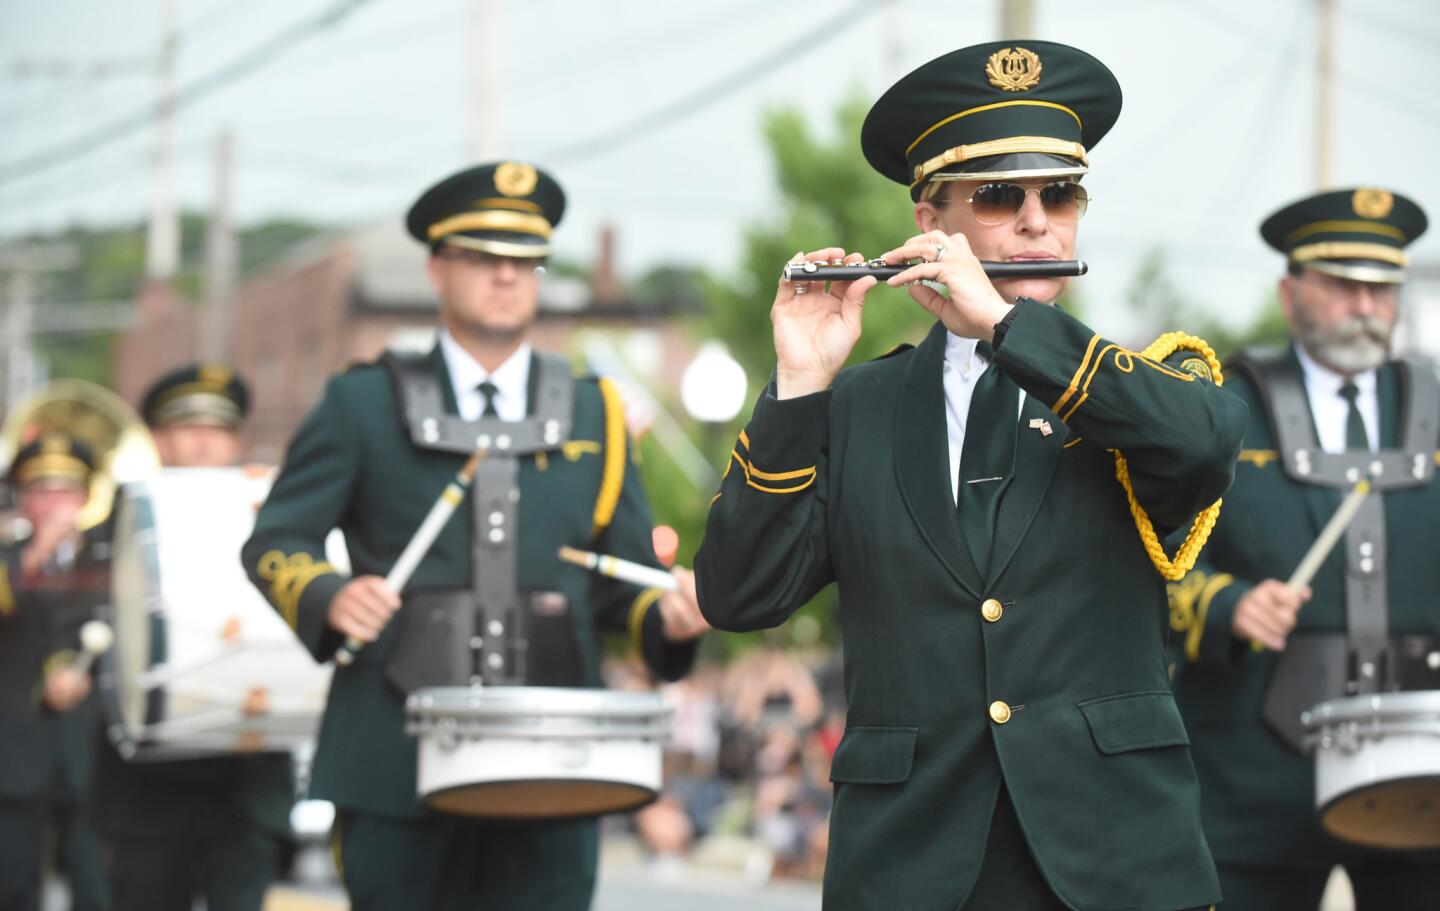 Musicians in the Westminster Municpal Band perform in the parade leading to the Manchester Volunteer Fire Company carnvial on Tuesday, July 2.